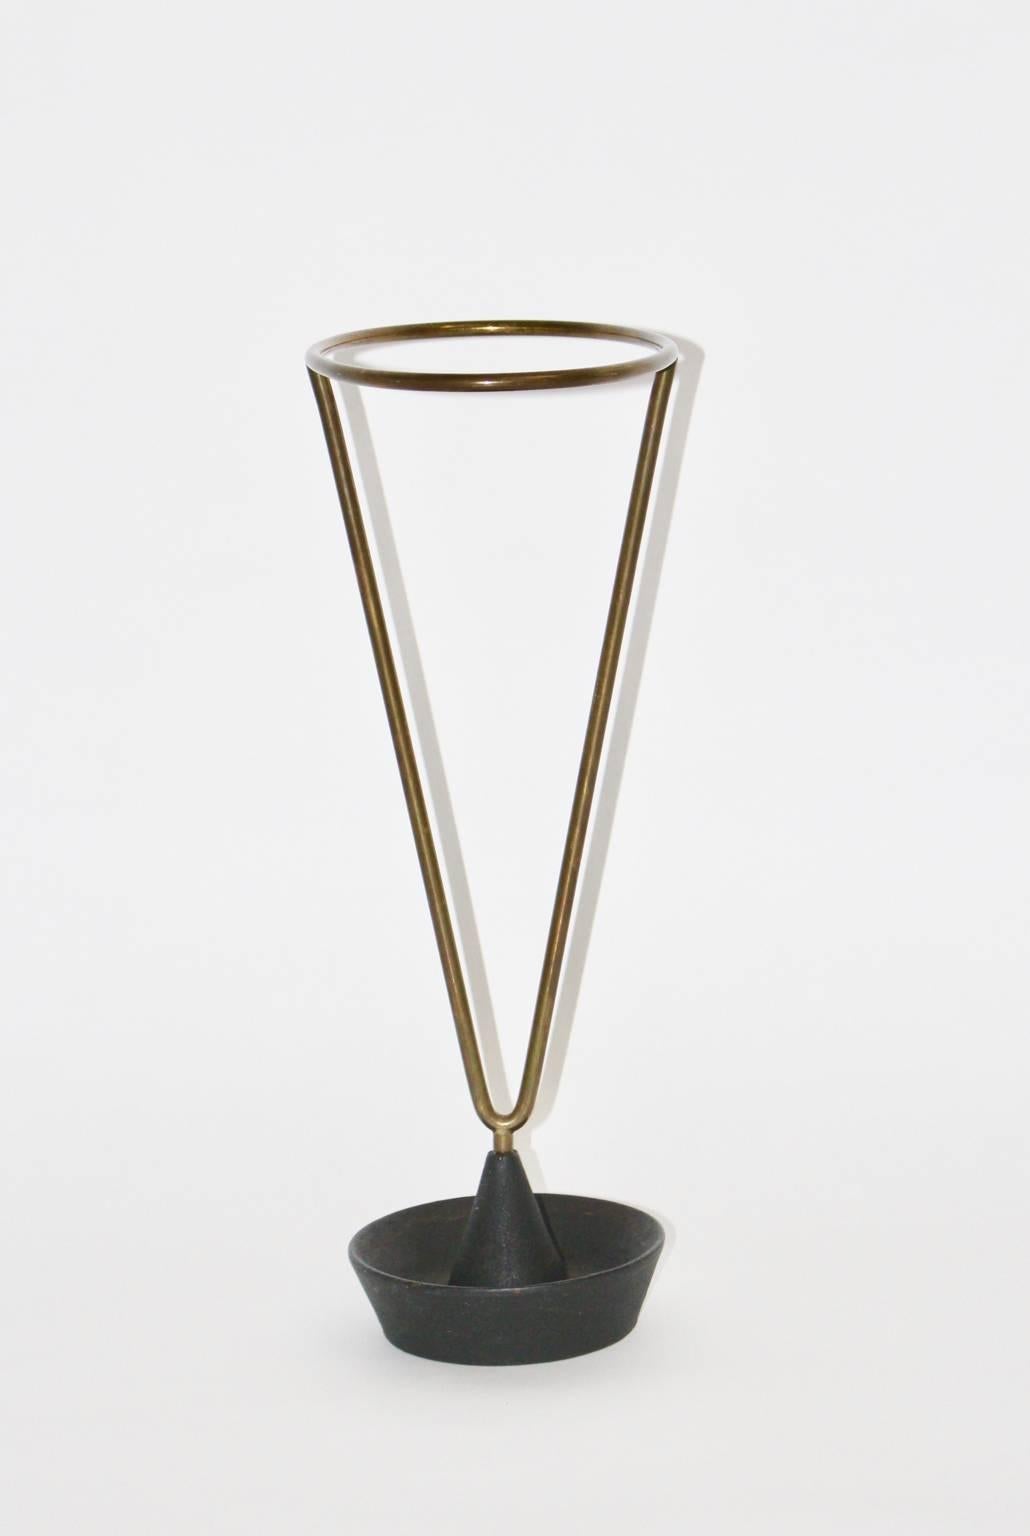 Simple, elegant and timeless design by Carl Auböck!

The umbrella stand was made of cast iron and brass.
The original condition is very good with a great patina.